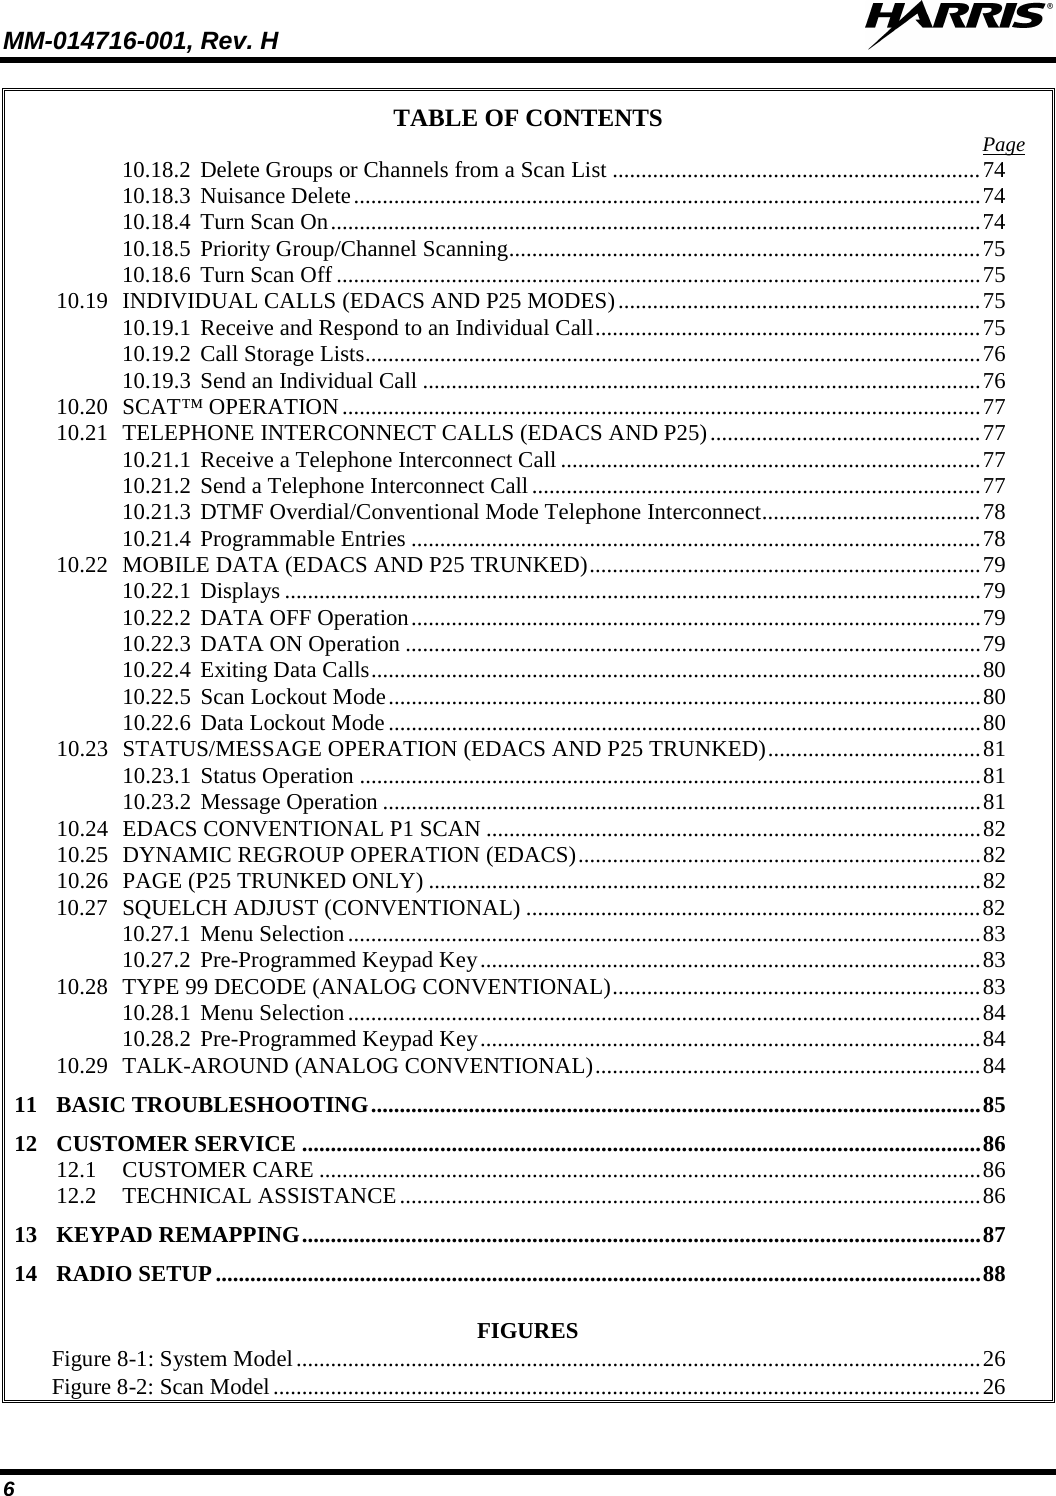 MM-014716-001, Rev. H  6 TABLE OF CONTENTS Page 10.18.2 Delete Groups or Channels from a Scan List ................................................................ 74 10.18.3 Nuisance Delete ............................................................................................................. 74 10.18.4 Turn Scan On ................................................................................................................. 74 10.18.5 Priority Group/Channel Scanning .................................................................................. 75 10.18.6 Turn Scan Off ................................................................................................................ 75 10.19 INDIVIDUAL CALLS (EDACS AND P25 MODES) ............................................................... 75 10.19.1 Receive and Respond to an Individual Call ................................................................... 75 10.19.2 Call Storage Lists ........................................................................................................... 76 10.19.3 Send an Individual Call ................................................................................................. 76 10.20 SCAT™ OPERATION ............................................................................................................... 77 10.21 TELEPHONE INTERCONNECT CALLS (EDACS AND P25) ............................................... 77 10.21.1 Receive a Telephone Interconnect Call ......................................................................... 77 10.21.2 Send a Telephone Interconnect Call .............................................................................. 77 10.21.3 DTMF Overdial/Conventional Mode Telephone Interconnect ...................................... 78 10.21.4 Programmable Entries ................................................................................................... 78 10.22 MOBILE DATA (EDACS AND P25 TRUNKED) .................................................................... 79 10.22.1 Displays ......................................................................................................................... 79 10.22.2 DATA OFF Operation ................................................................................................... 79 10.22.3 DATA ON Operation .................................................................................................... 79 10.22.4 Exiting Data Calls .......................................................................................................... 80 10.22.5 Scan Lockout Mode ....................................................................................................... 80 10.22.6 Data Lockout Mode ....................................................................................................... 80 10.23 STATUS/MESSAGE OPERATION (EDACS AND P25 TRUNKED) ..................................... 81 10.23.1 Status Operation ............................................................................................................ 81 10.23.2 Message Operation ........................................................................................................ 81 10.24 EDACS CONVENTIONAL P1 SCAN ...................................................................................... 82 10.25 DYNAMIC REGROUP OPERATION (EDACS) ...................................................................... 82 10.26 PAGE (P25 TRUNKED ONLY) ................................................................................................ 82 10.27 SQUELCH ADJUST (CONVENTIONAL) ............................................................................... 82 10.27.1 Menu Selection .............................................................................................................. 83 10.27.2 Pre-Programmed Keypad Key ....................................................................................... 83 10.28 TYPE 99 DECODE (ANALOG CONVENTIONAL) ................................................................ 83 10.28.1 Menu Selection .............................................................................................................. 84 10.28.2 Pre-Programmed Keypad Key ....................................................................................... 84 10.29 TALK-AROUND (ANALOG CONVENTIONAL) ................................................................... 84 11 BASIC TROUBLESHOOTING .......................................................................................................... 85 12 CUSTOMER SERVICE ...................................................................................................................... 86 12.1 CUSTOMER CARE ................................................................................................................... 86 12.2 TECHNICAL ASSISTANCE ..................................................................................................... 86 13 KEYPAD REMAPPING ...................................................................................................................... 87 14 RADIO SETUP ..................................................................................................................................... 88  FIGURES Figure 8-1: System Model ....................................................................................................................... 26 Figure 8-2: Scan Model ........................................................................................................................... 26 